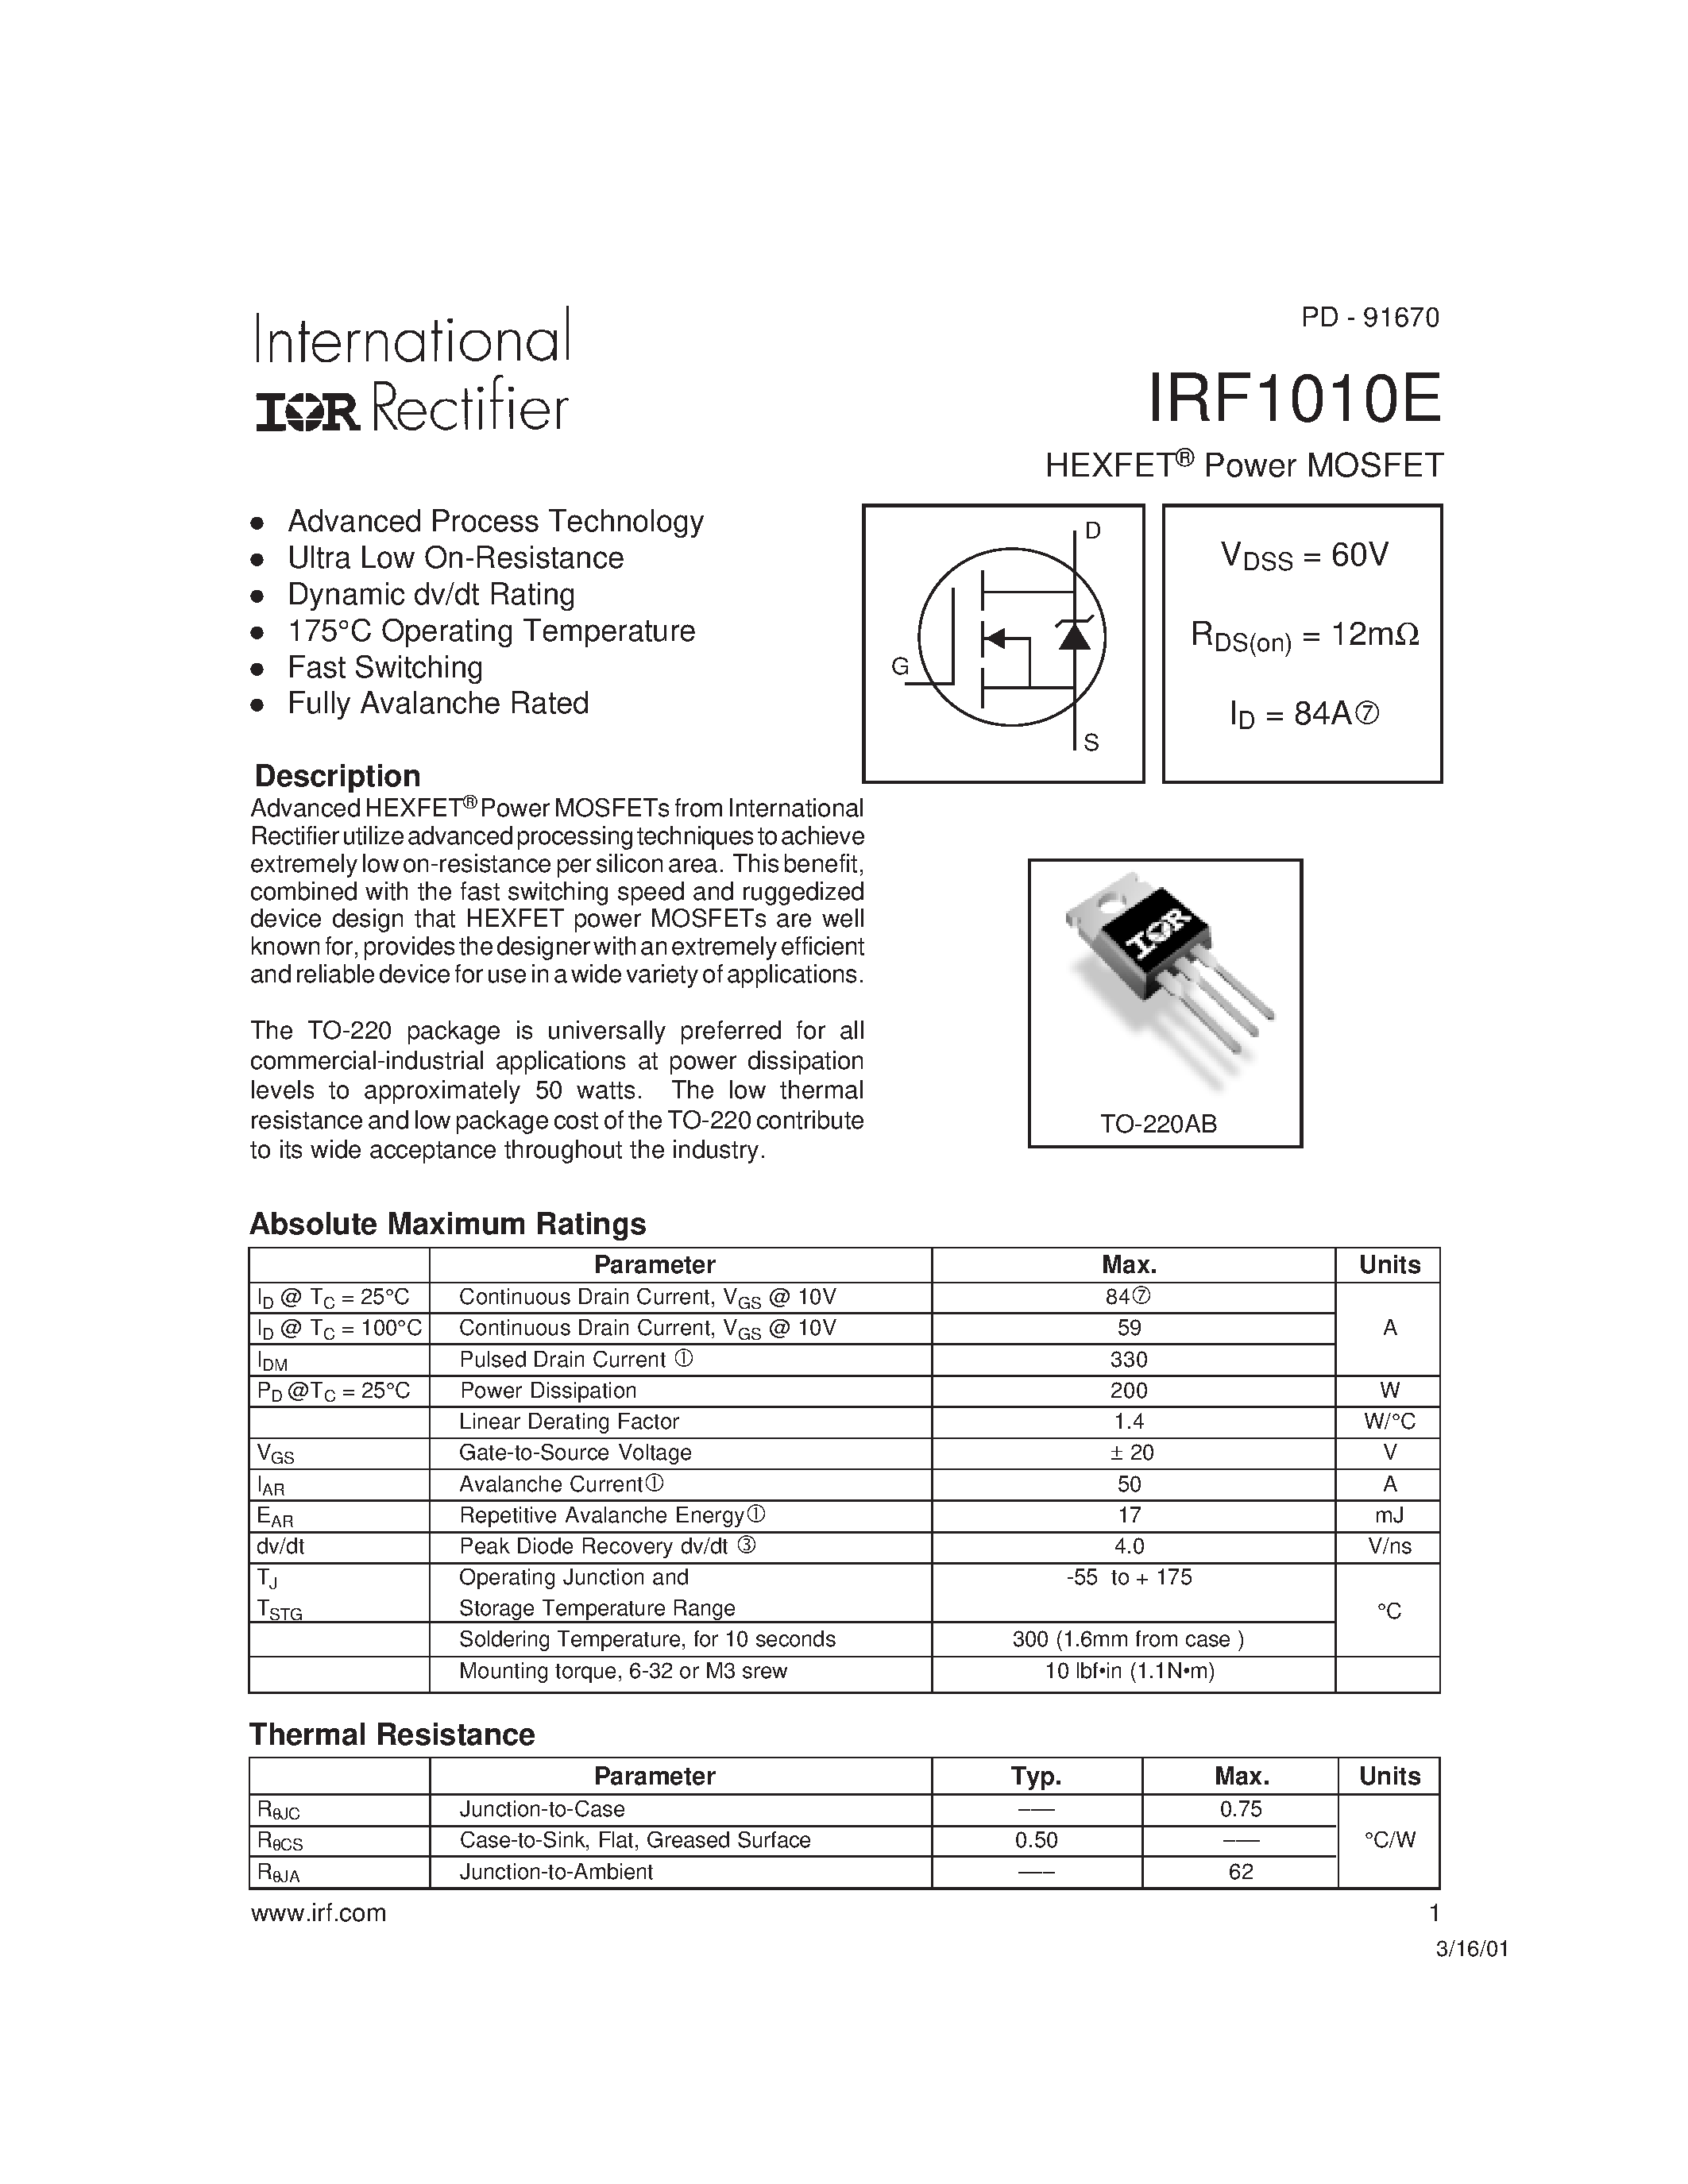 Datasheet IRF1010E - Power MOSFET(Vdss=60V/Rds(on)=12mohm/Id=84A page 1